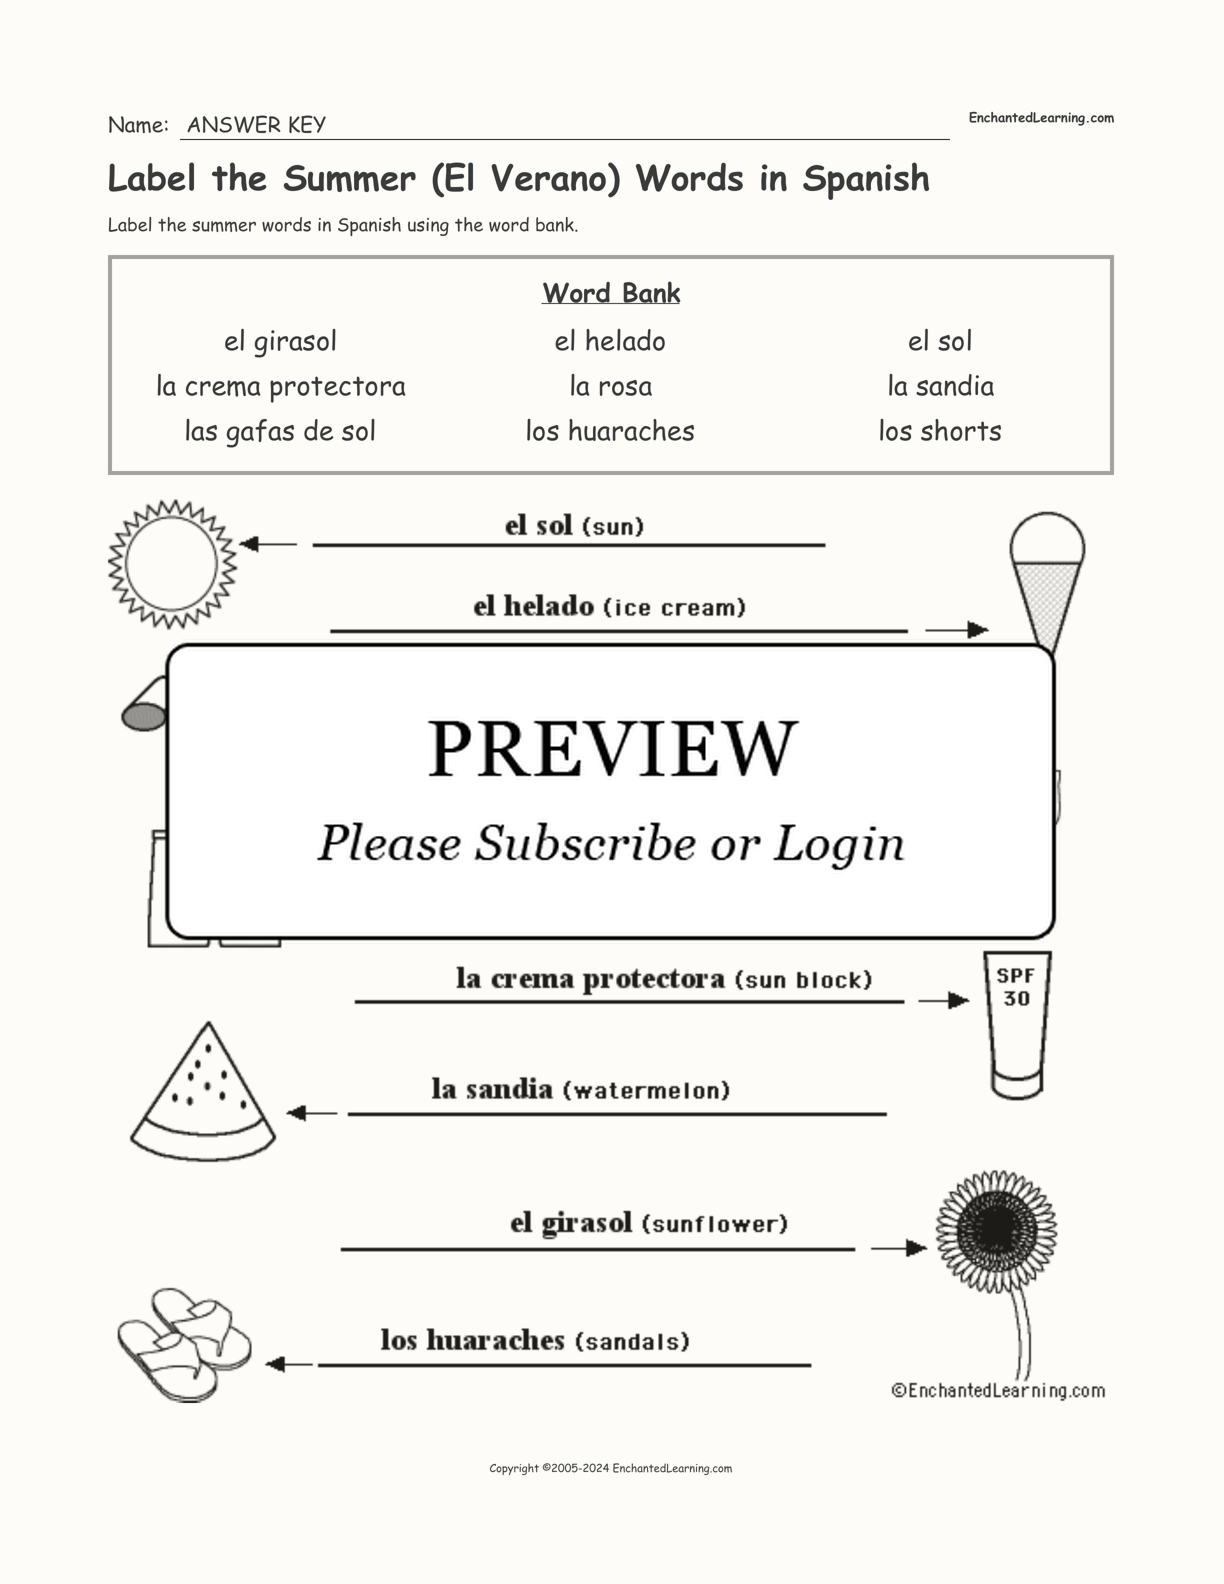 Label the Summer (El Verano) Words in Spanish interactive worksheet page 2